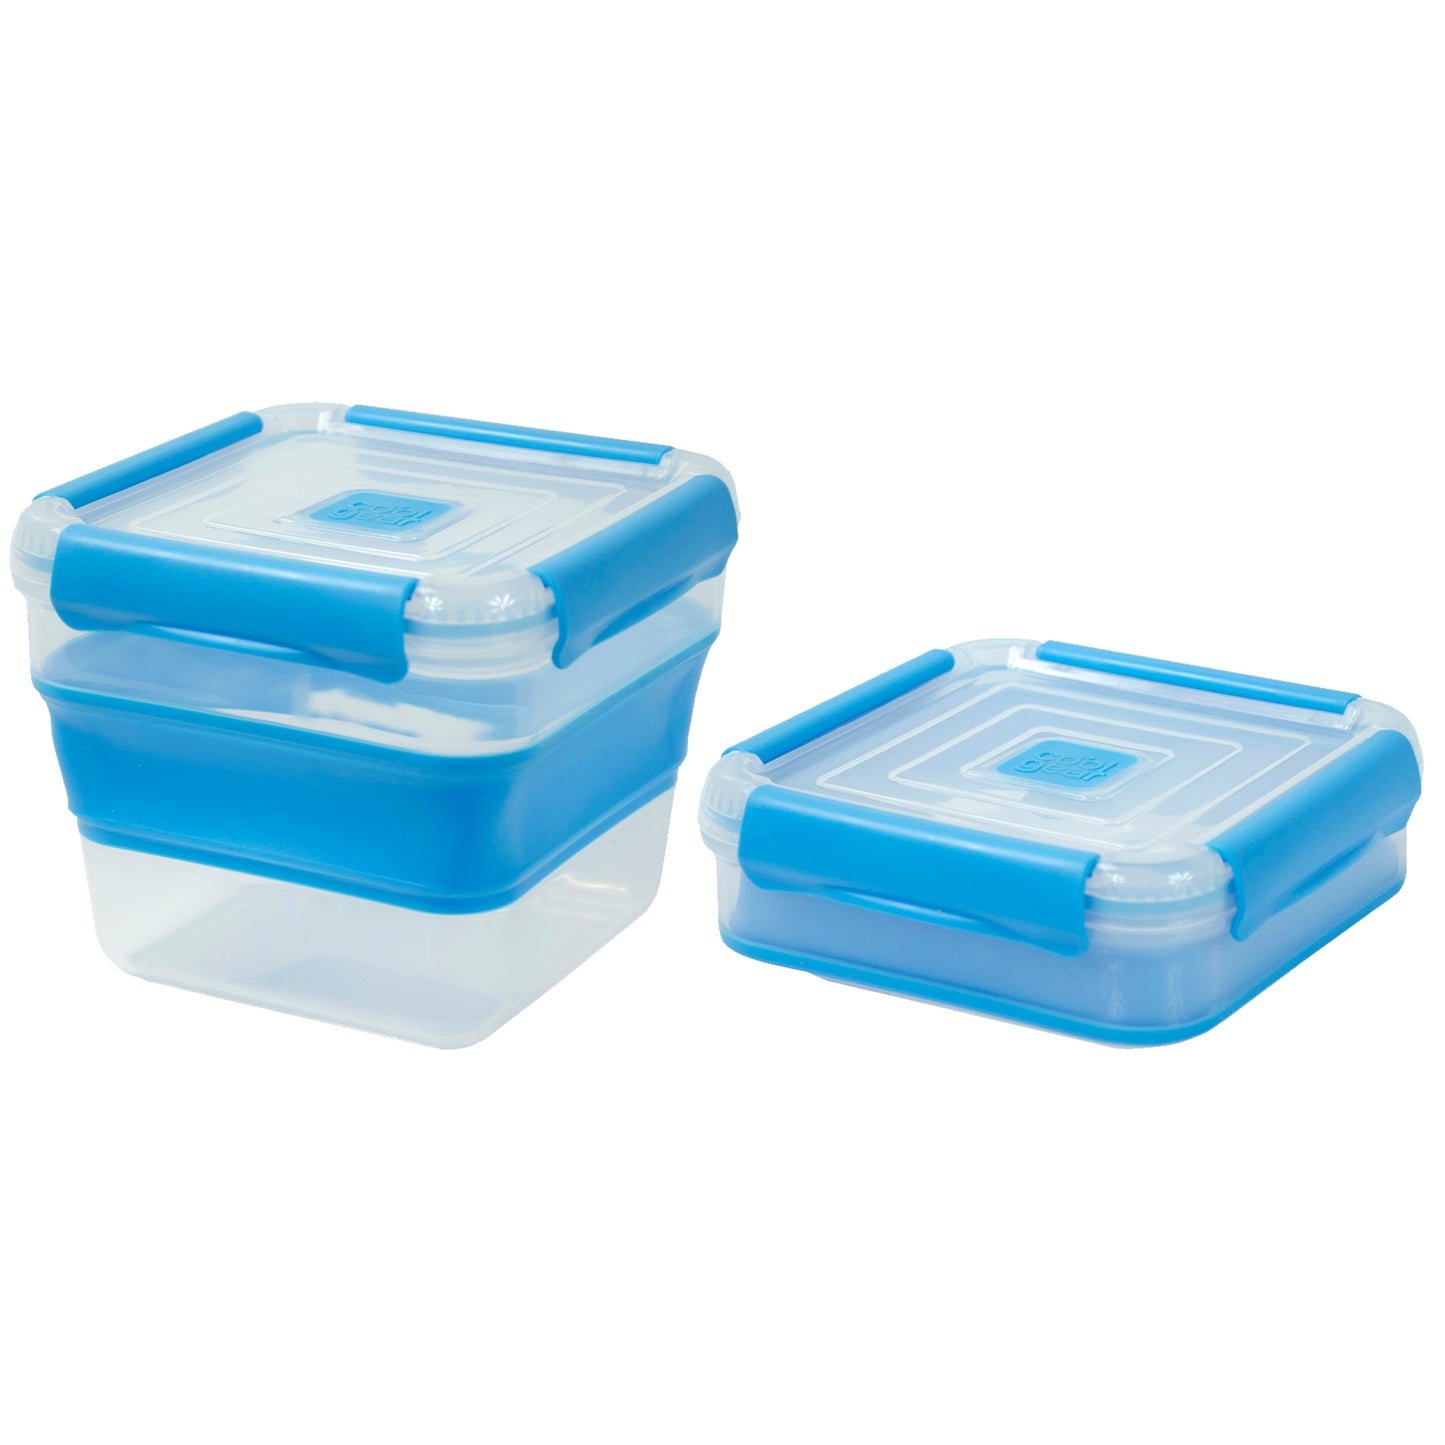 COOL GEAR 3-Pack Collapsible 7.5 Cup Square Food Container | Dishwasher and Microwave Safe | Perfect for On The Go Lunches and Leftovers | Expands to Hold 2x More | Air Tight Snaps Keeps Food Fresh